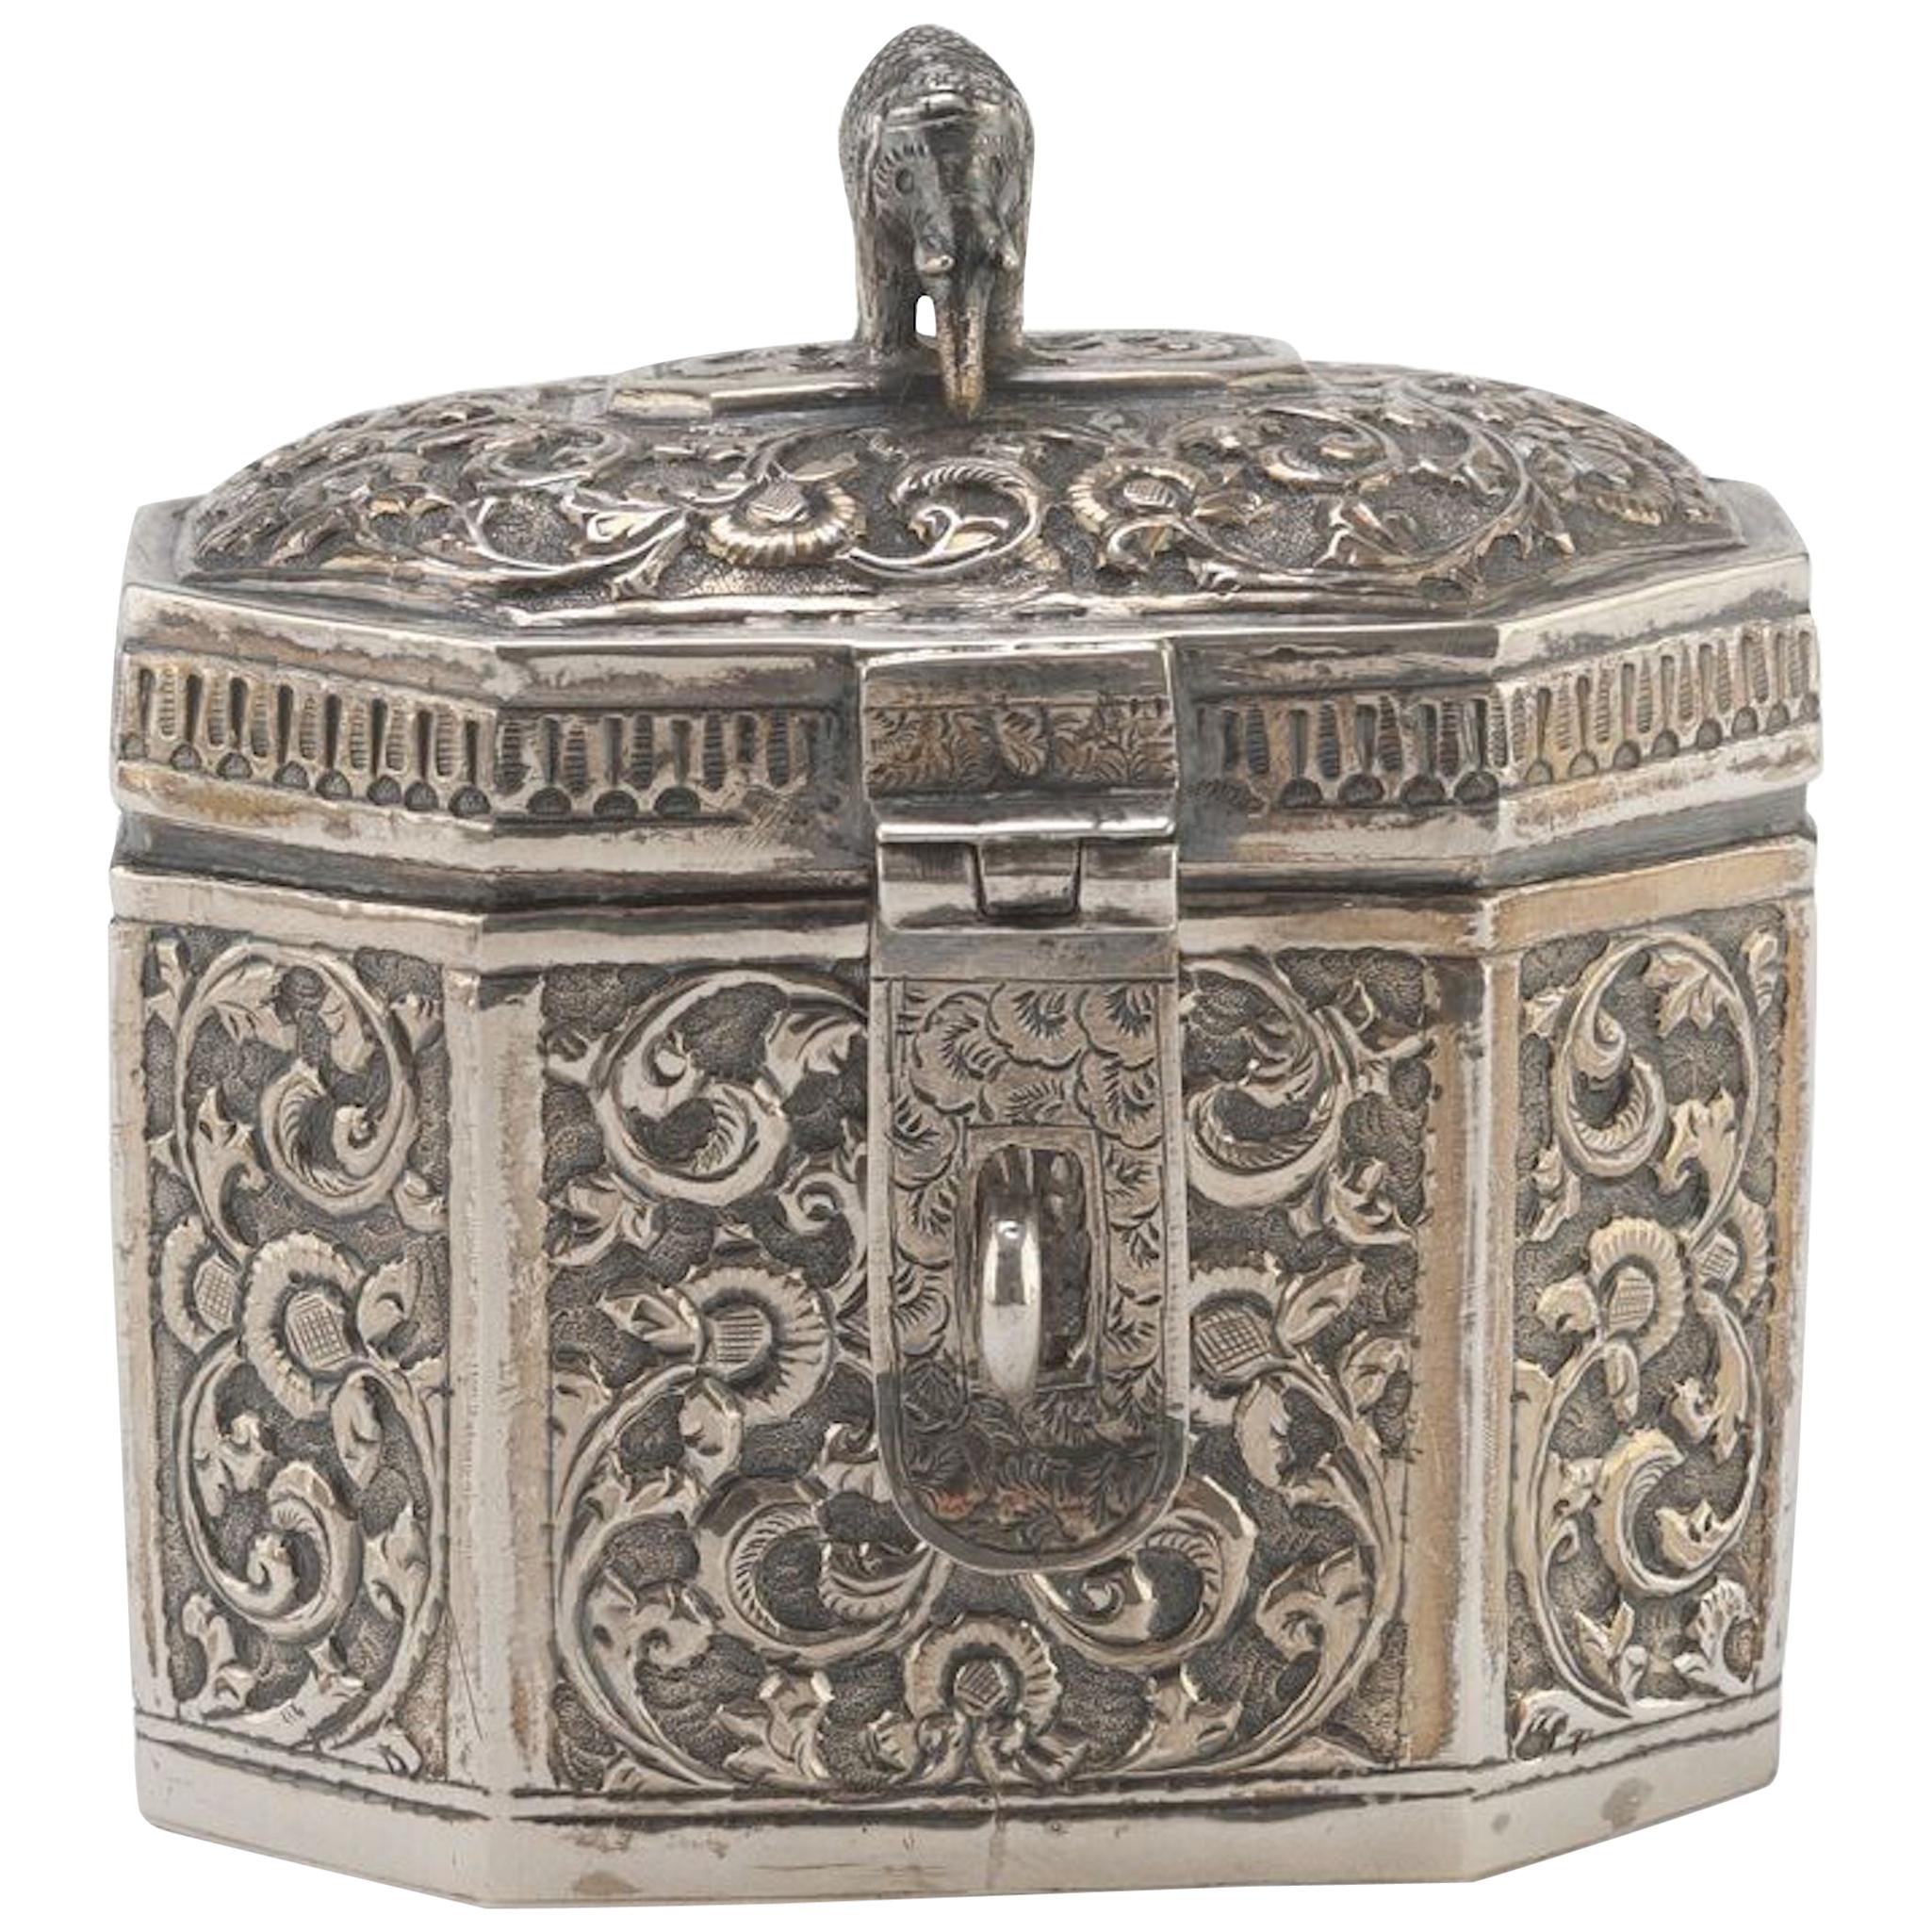 Vintage Silverplate Box, India, Early 20th Century